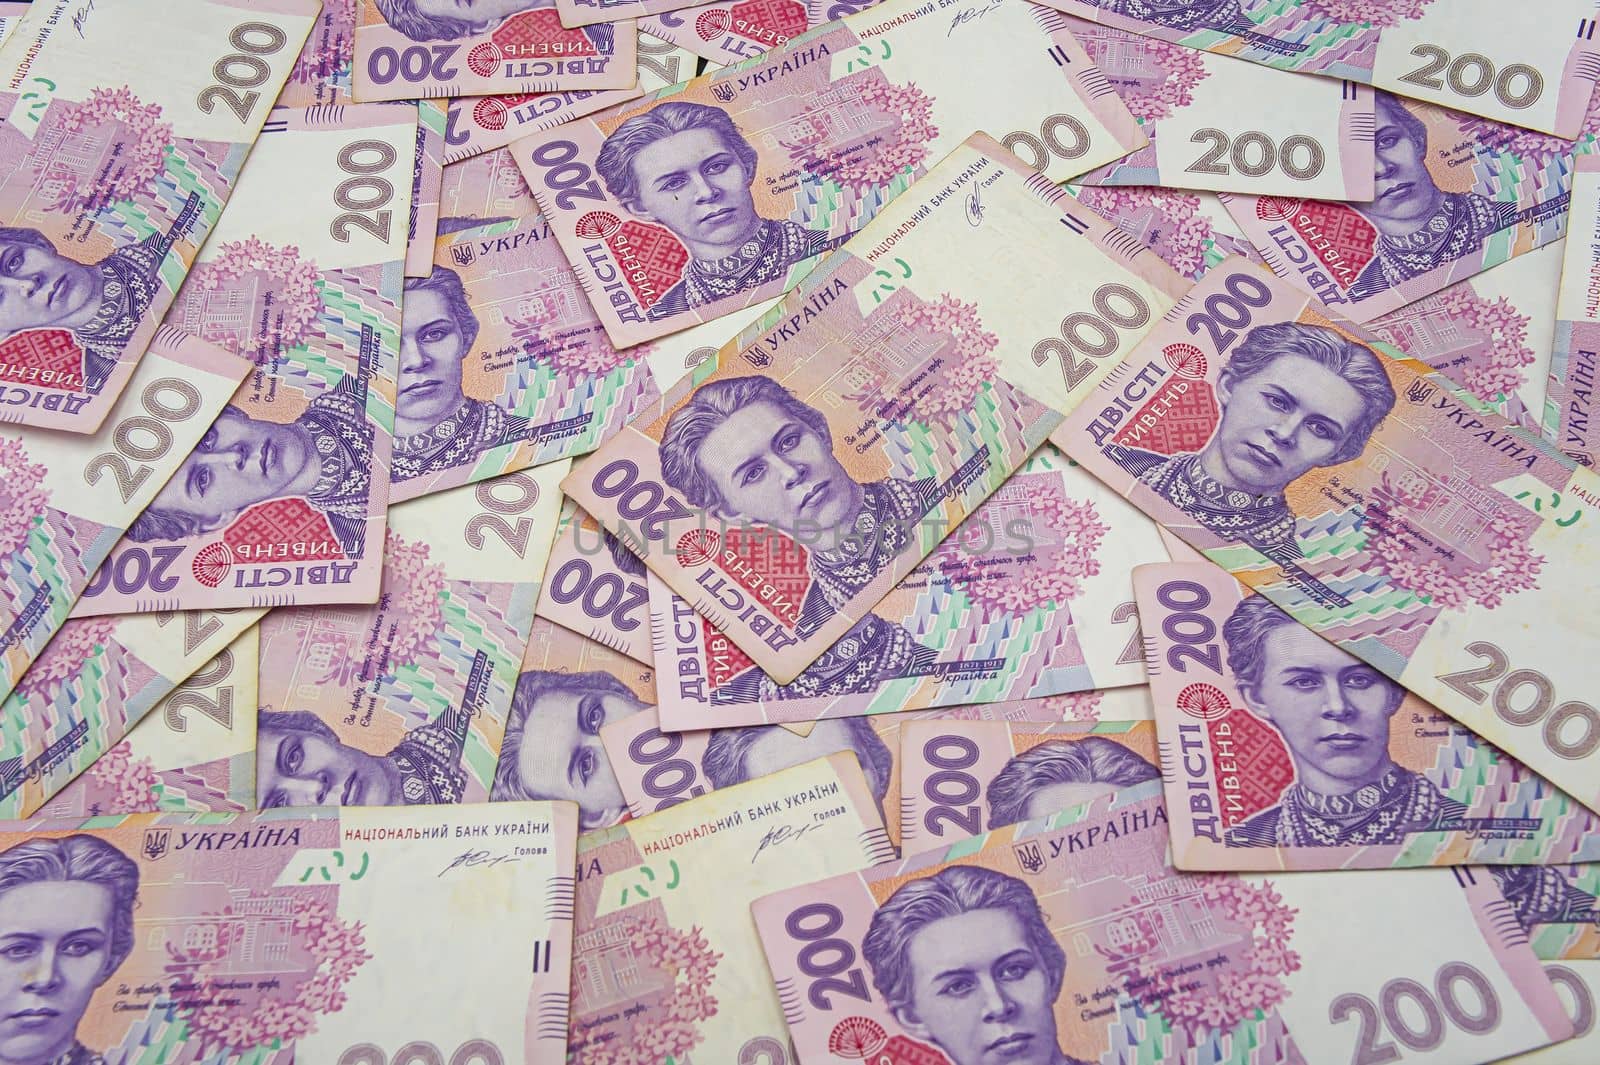 Ukrainian money background. banknotes with a face value of 200 hryvnia money background. Ukrainian money. Business concept. Background with hryvnia. Pink-blue